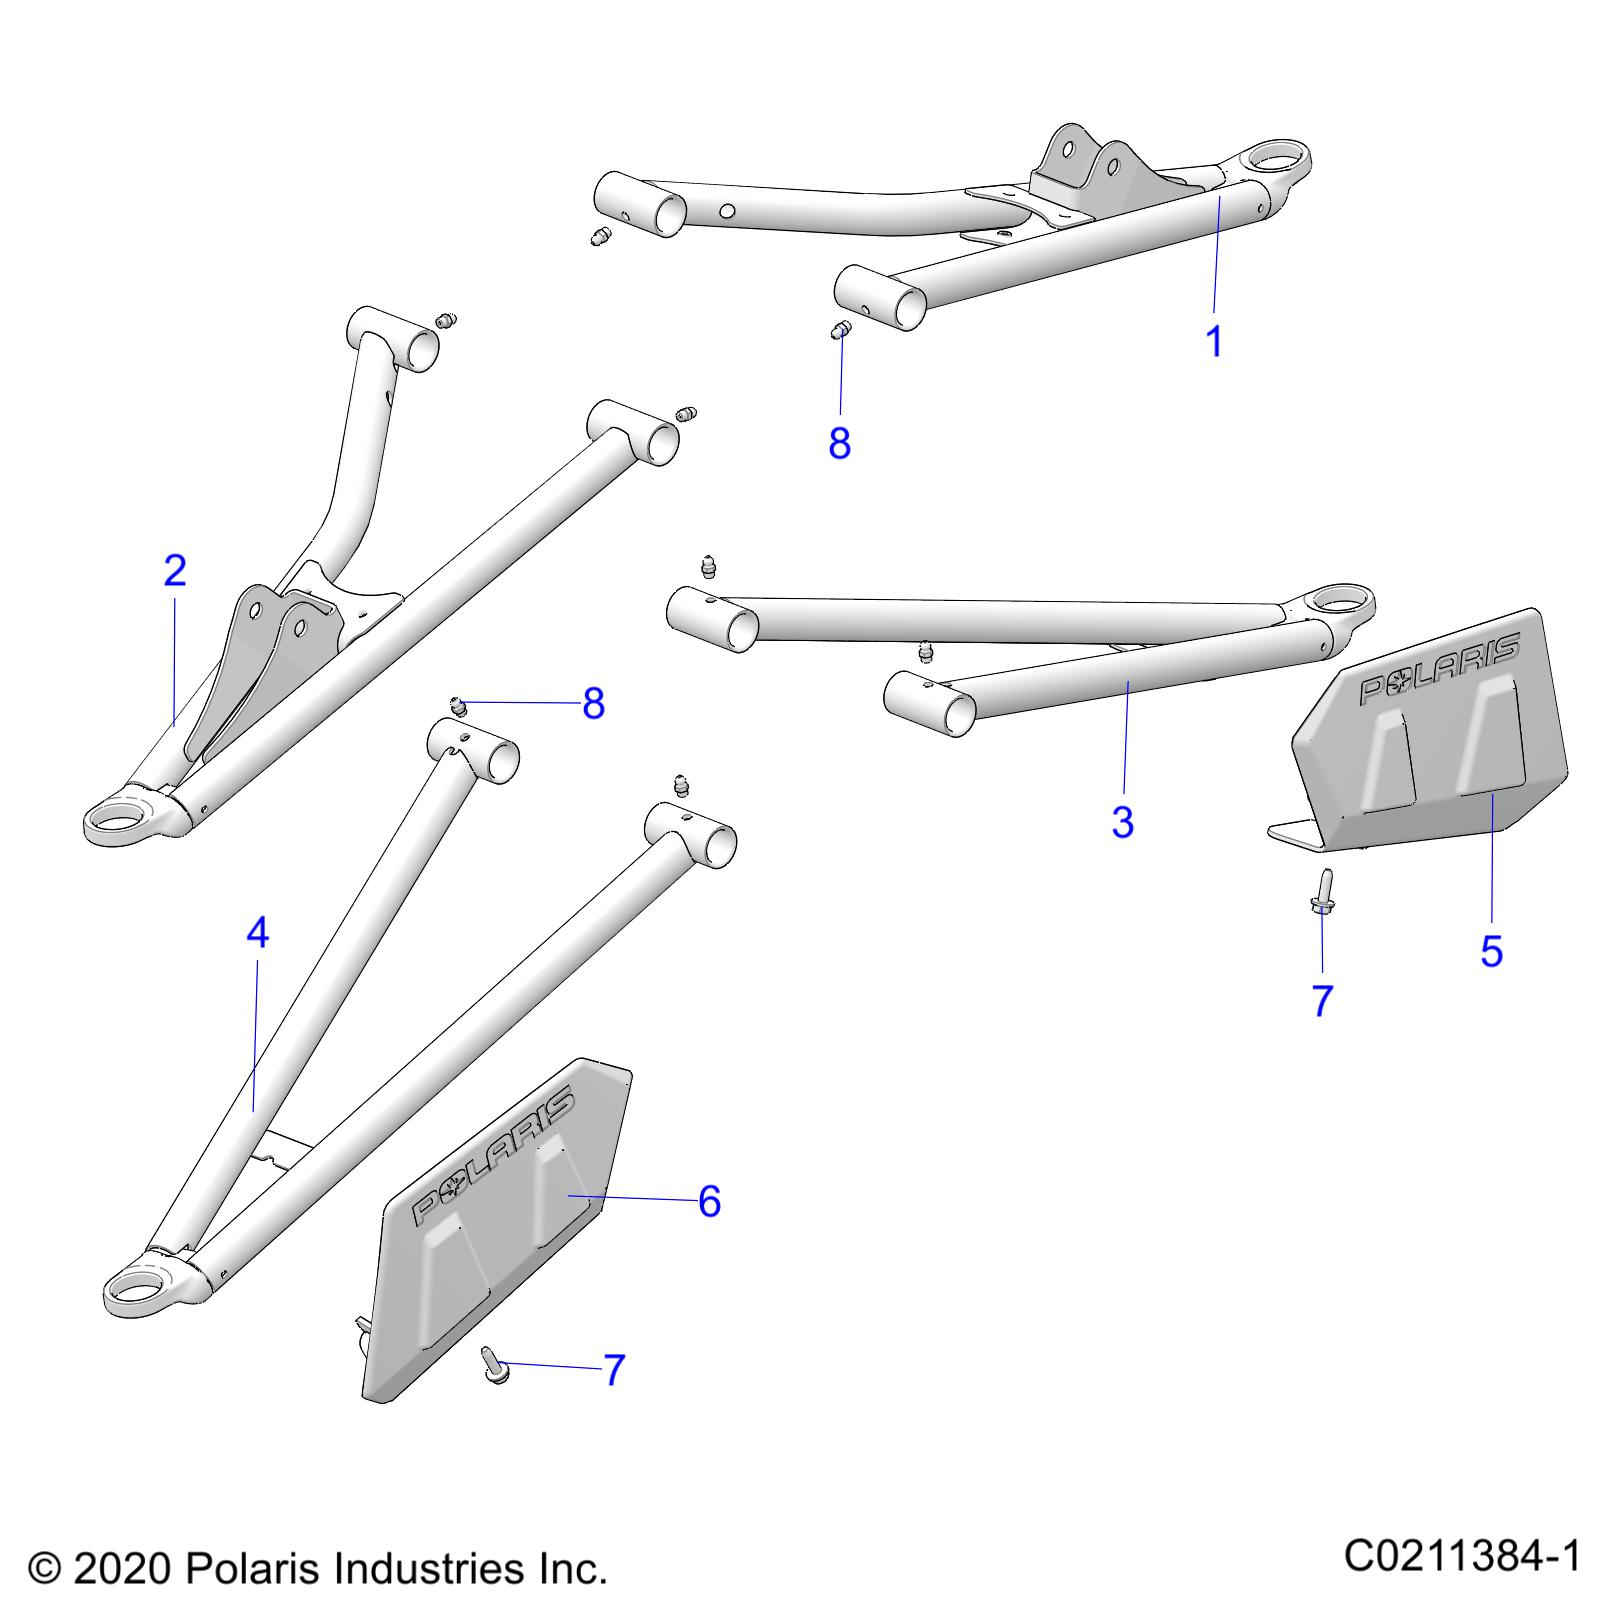 Part Number : 1019811-067 ARM CONTROL  FRONT  LOWER  RIG